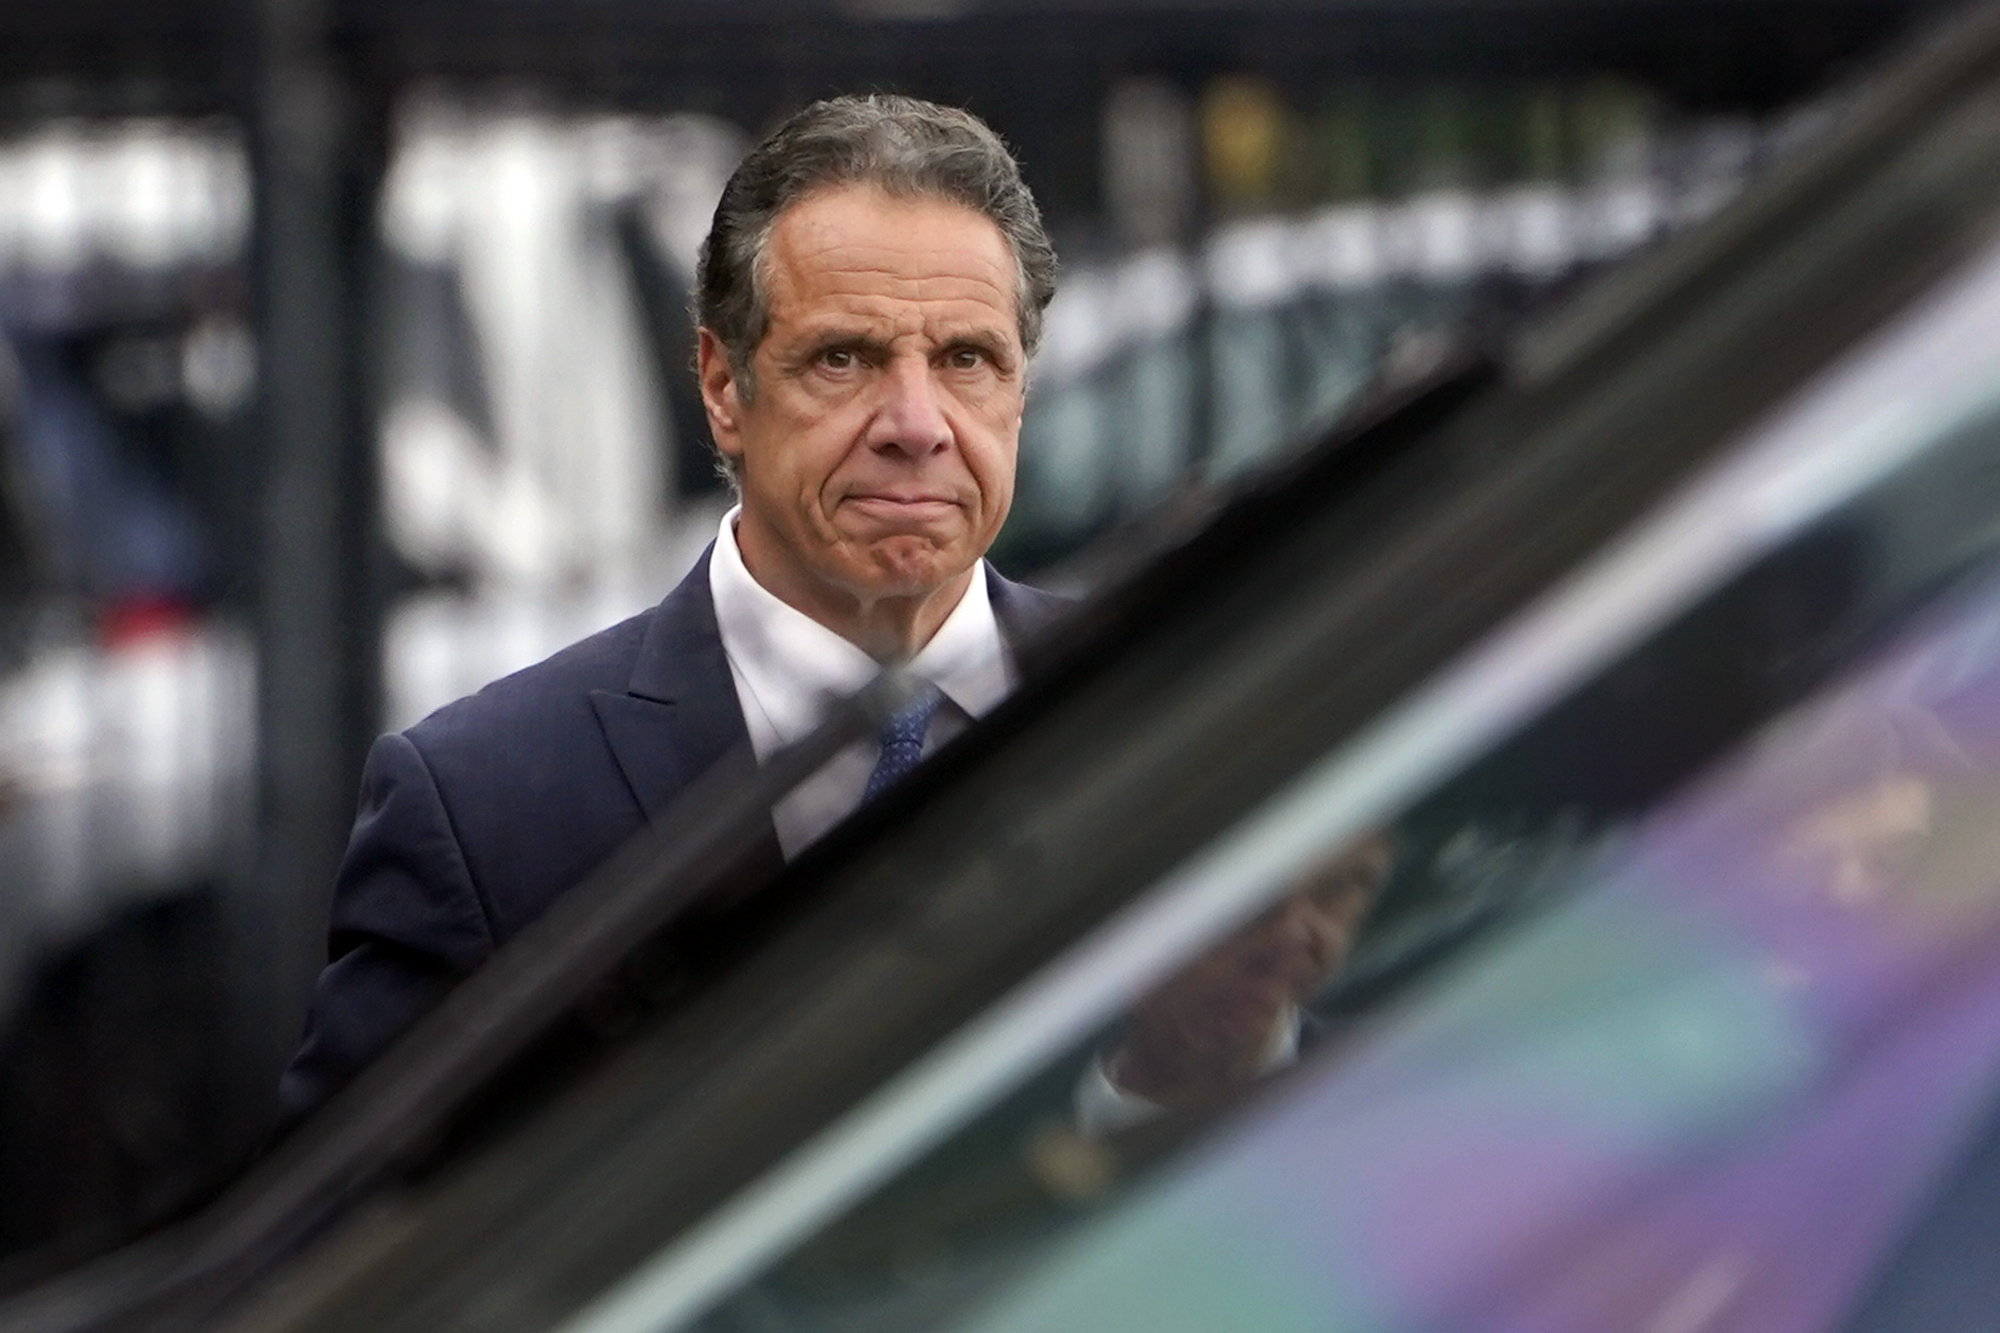 PHOTO: FILE - New York Gov. Andrew Cuomo prepares to board a helicopter after announcing his resignation, on Aug. 10, 2021, in New York.